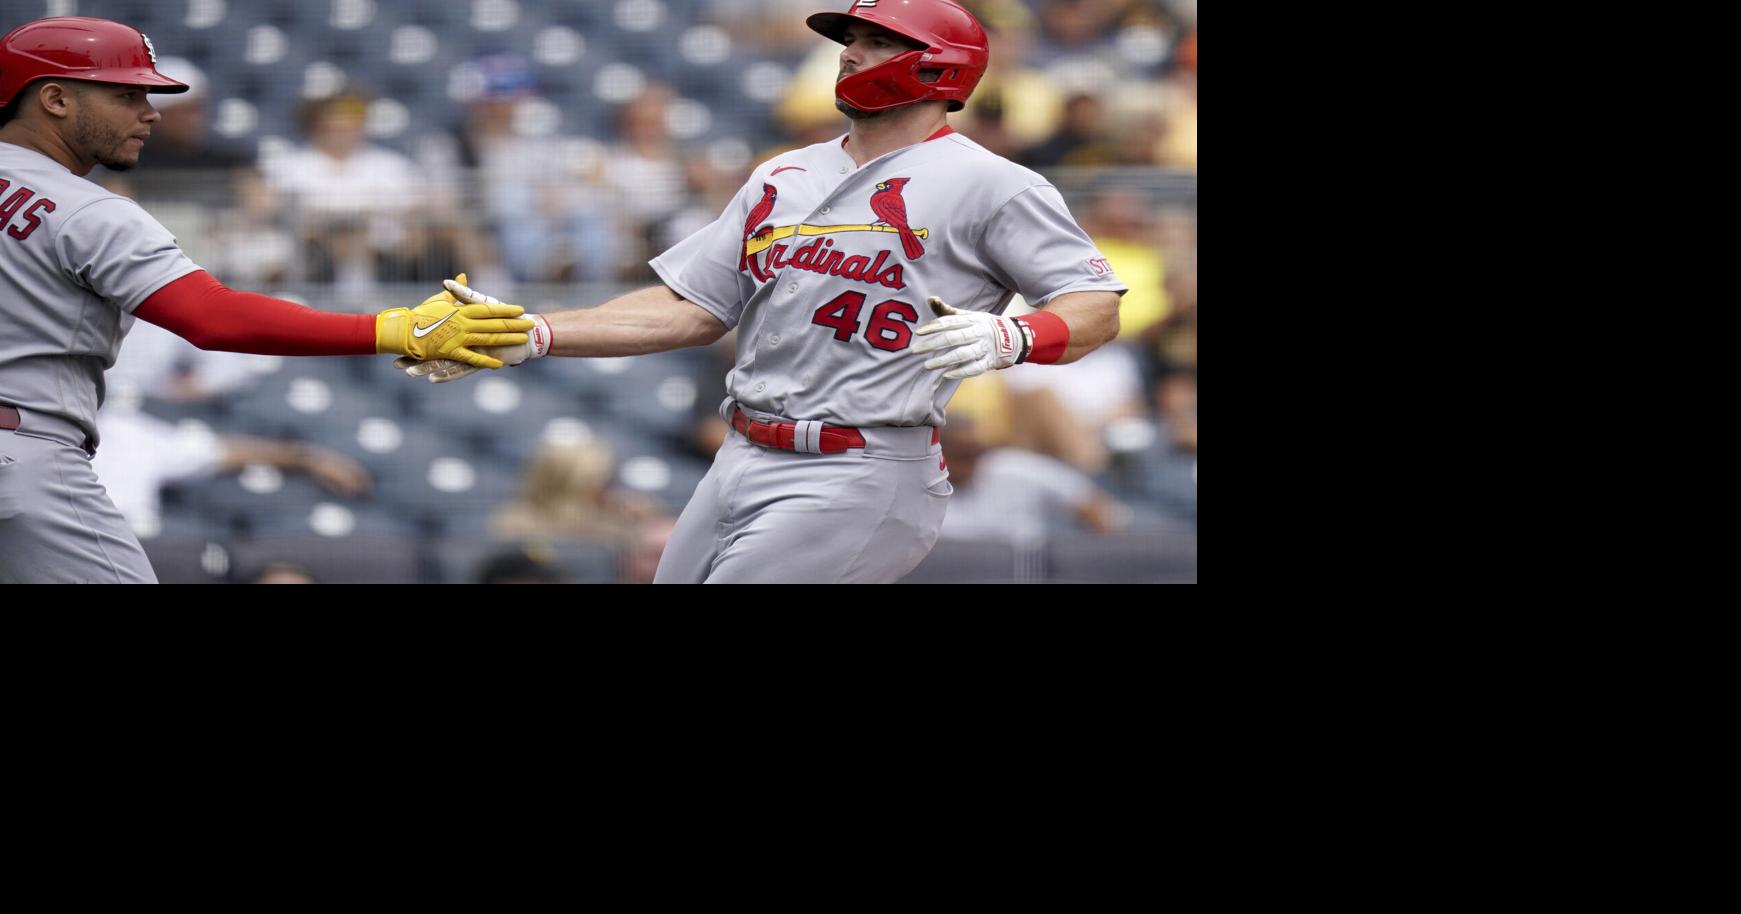 Swept by Pirates, besieged by losses, how can last-place Cardinals